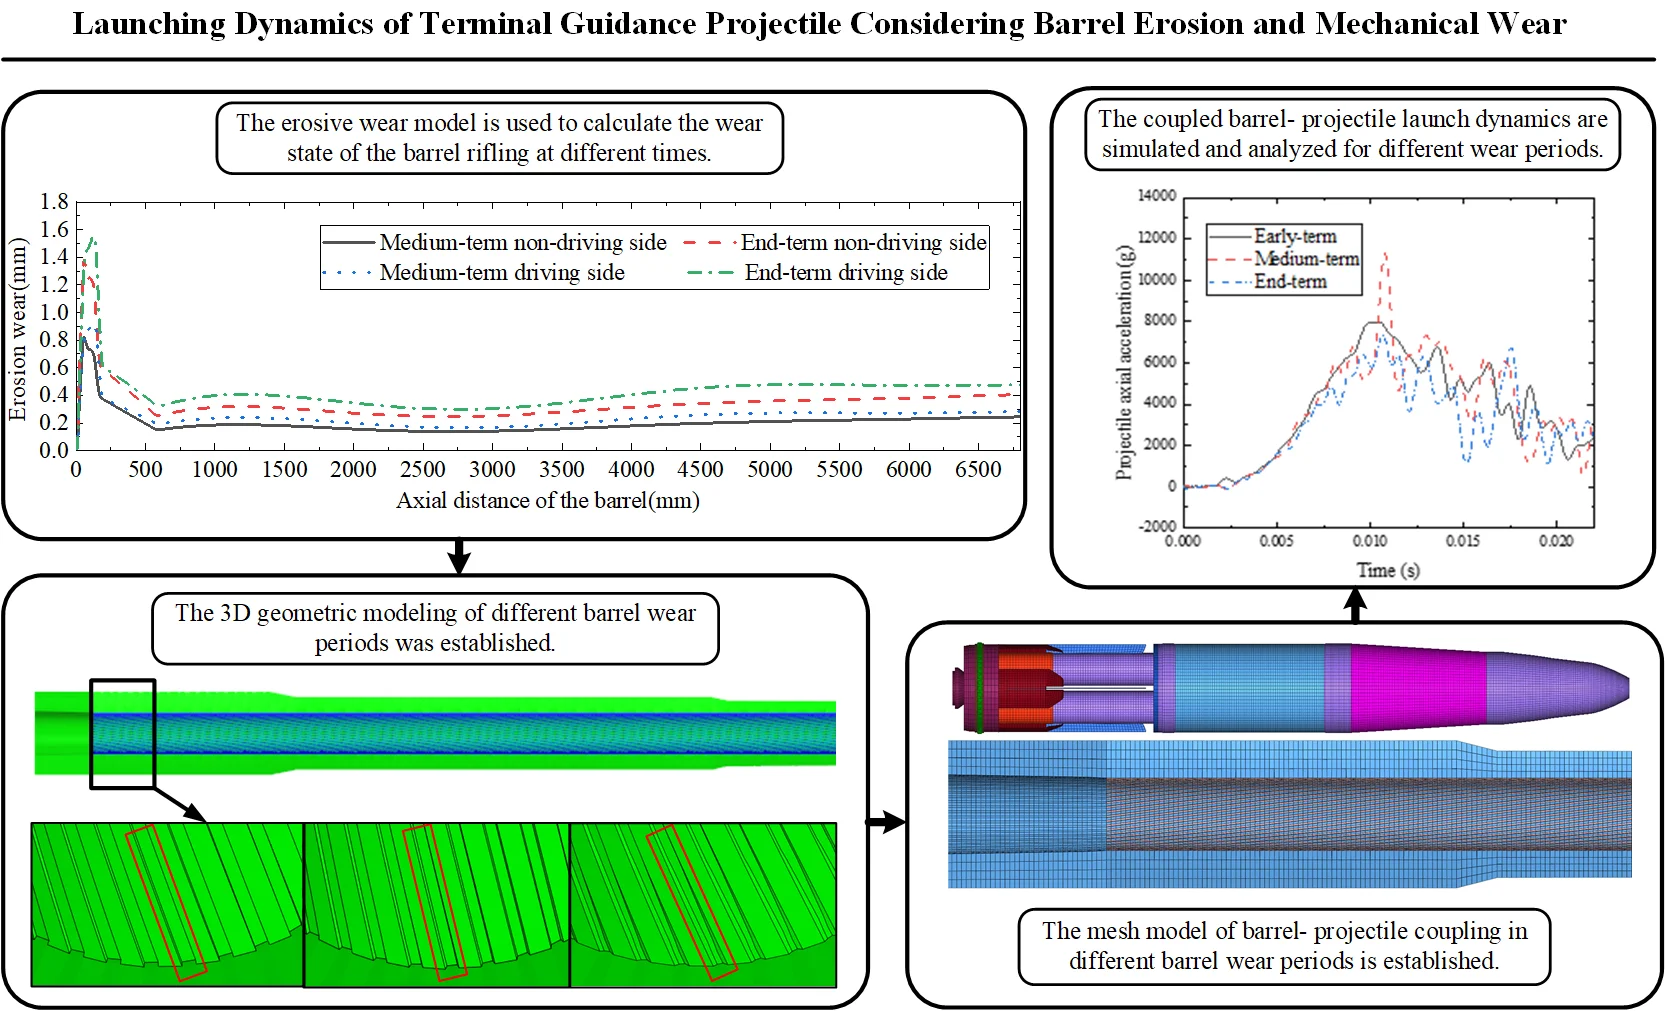 Launching dynamics of terminal guidance projectile considering barrel erosion and mechanical wear